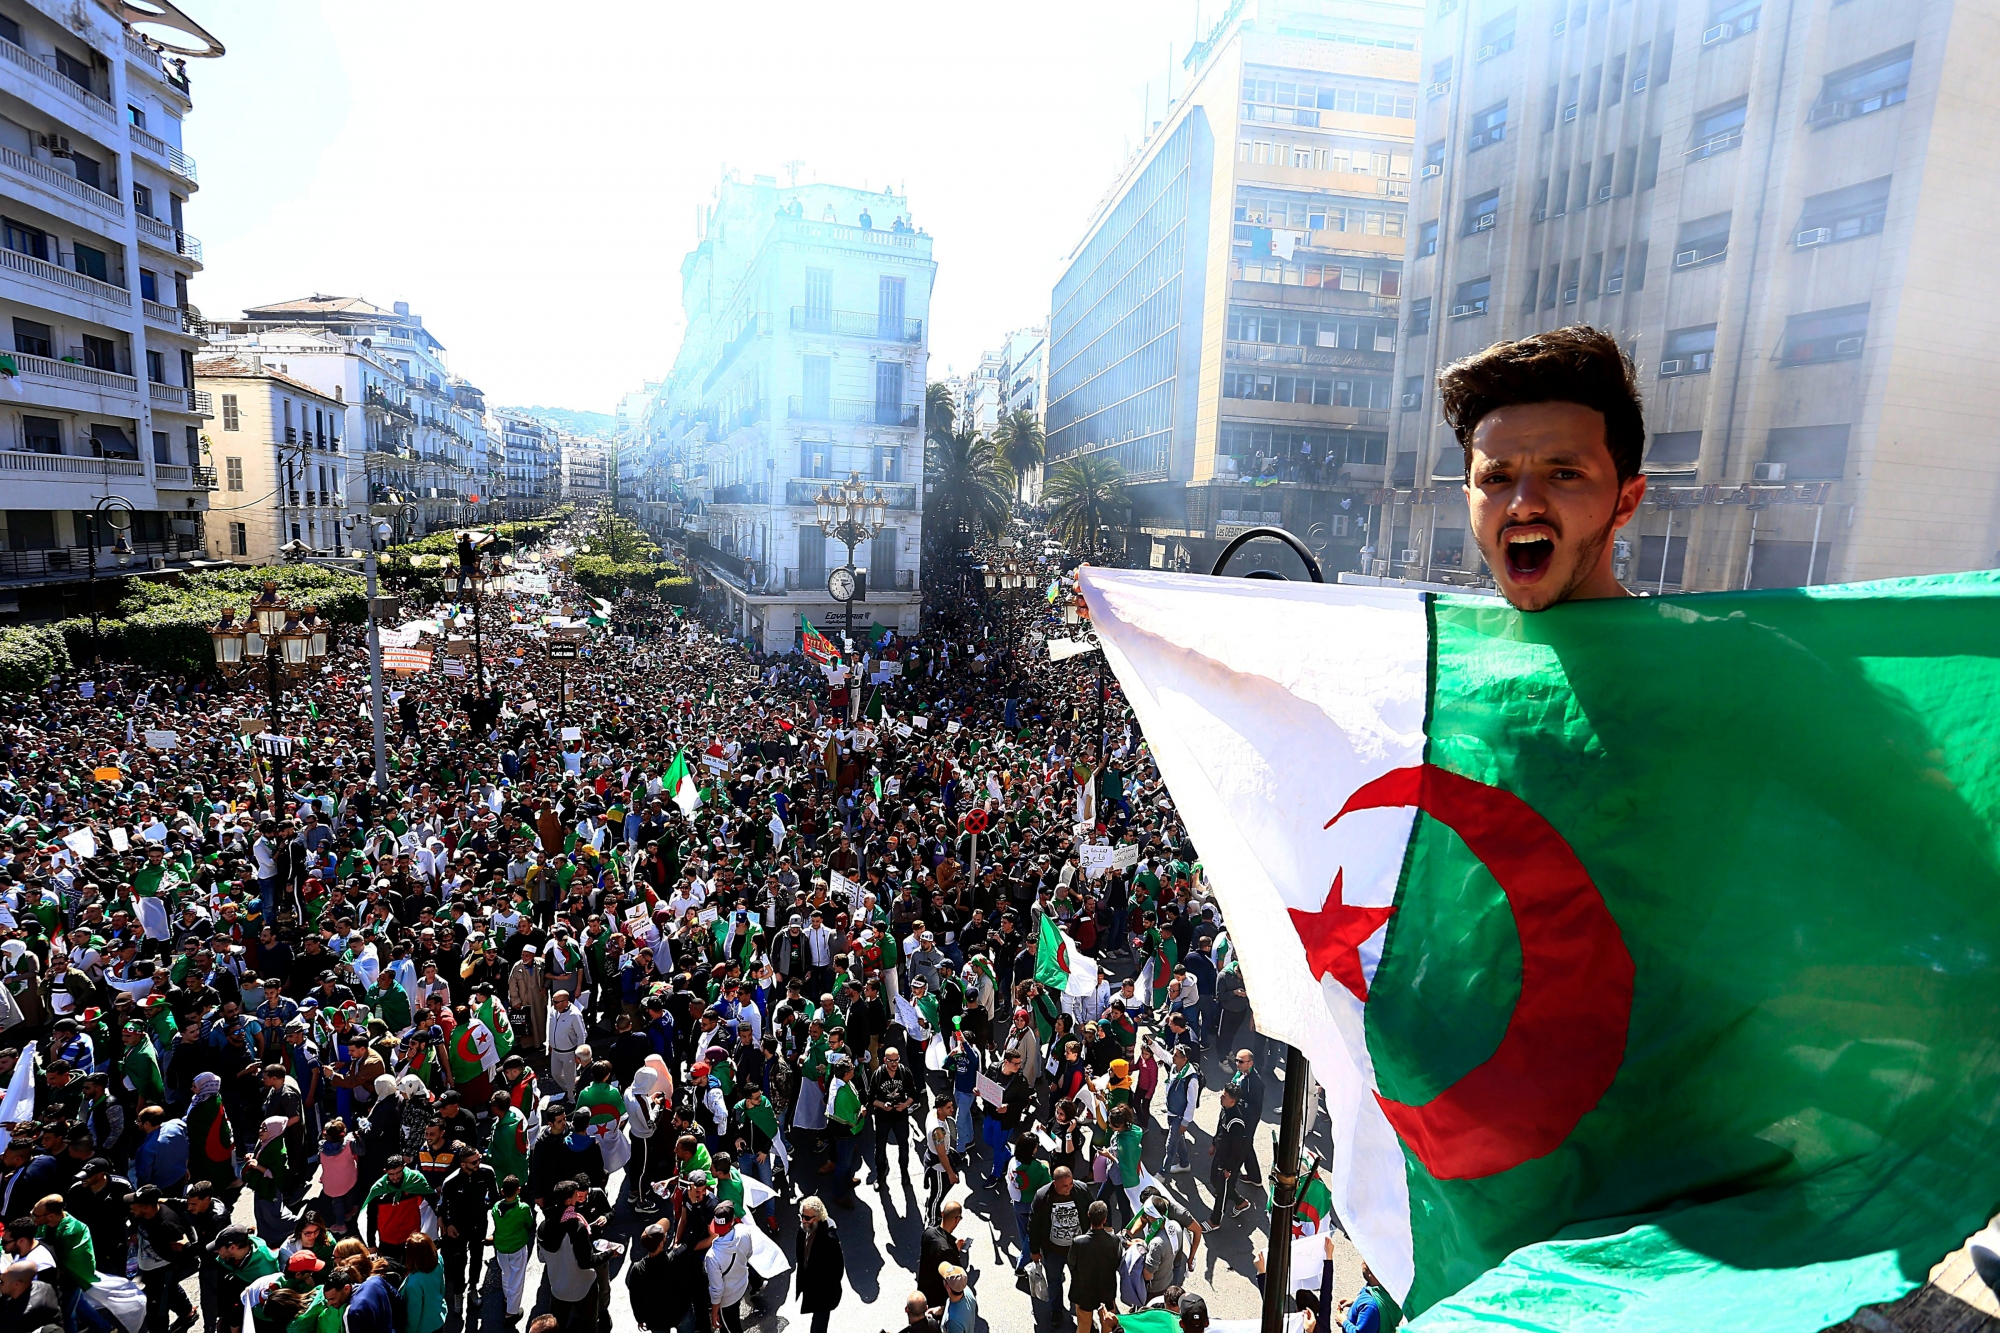 Algerian shouts as he holds the national flag during a protest in Algiers, Algeria, Friday, March 15, 2019. Tens of thousands of people gathered Friday in Algeria's capital and other cities amid heavy security for what could be decisive protests against longtime leader Abdelaziz Bouteflika. (AP Photo/Toufik Doudou) Algeria Protests